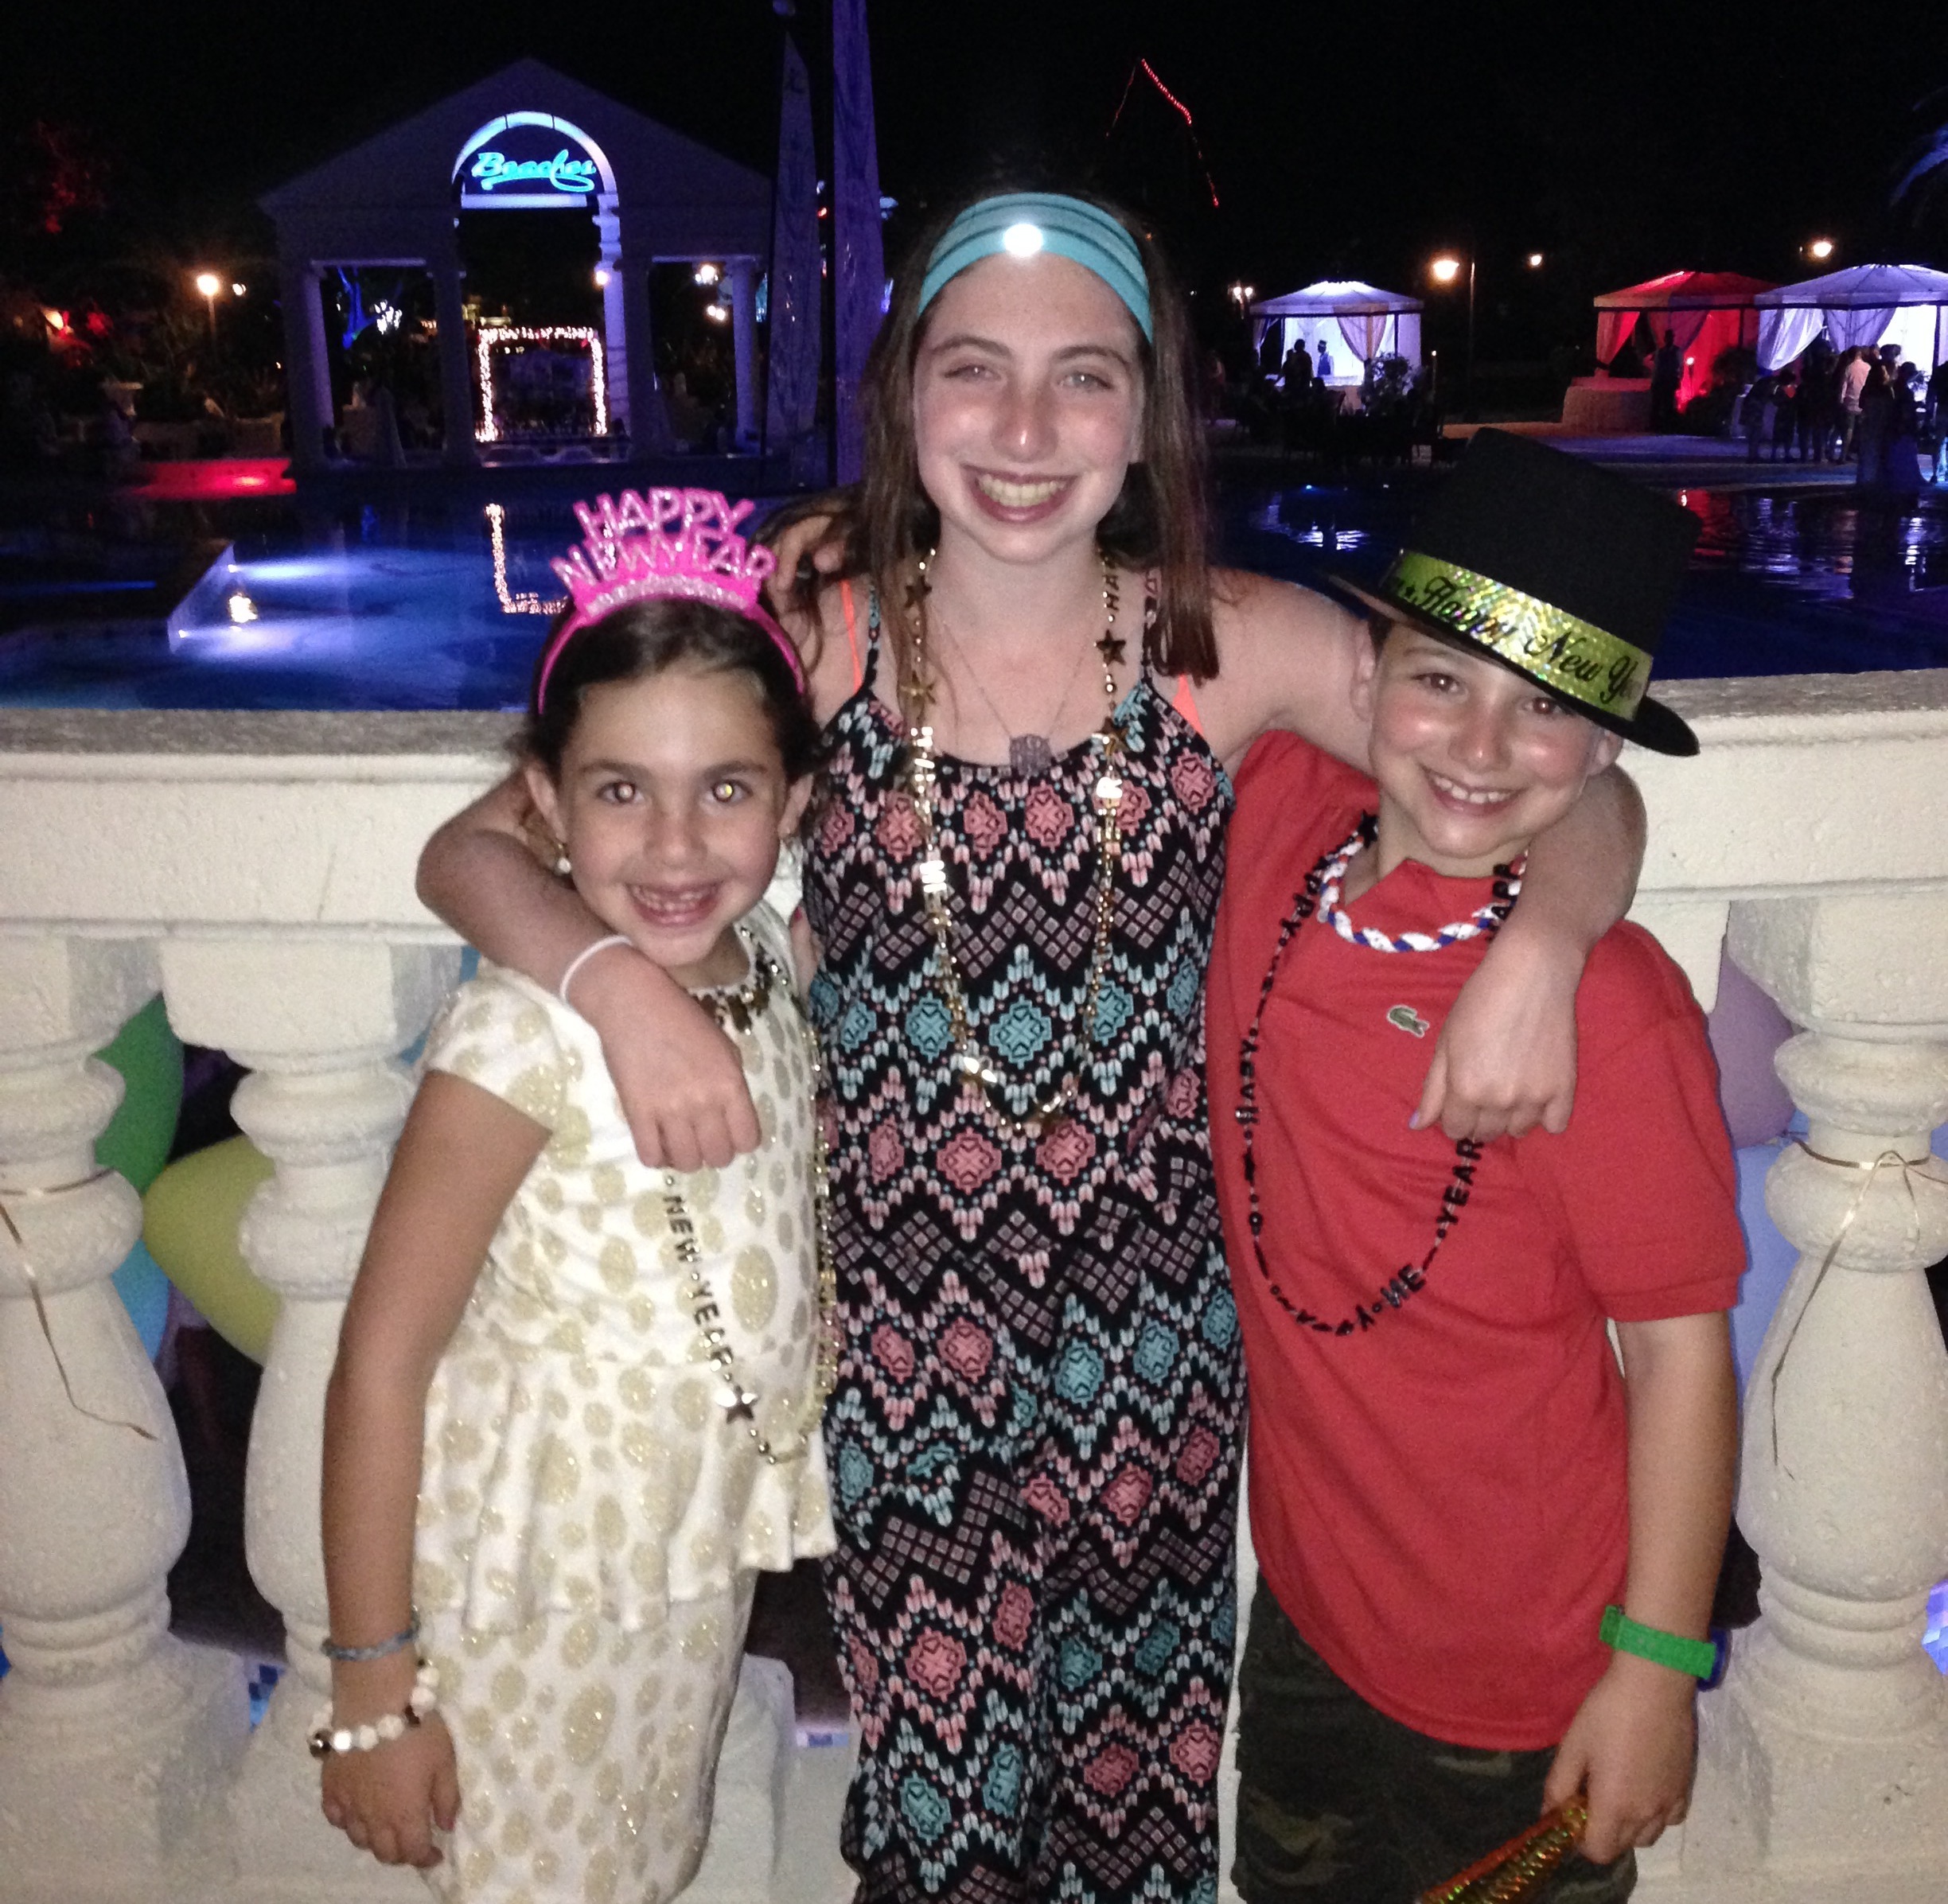 Cousins on vacation.  From L to R: Sasha Marcus, Bailey Germain and Dylan Germain on New Year's Eve.